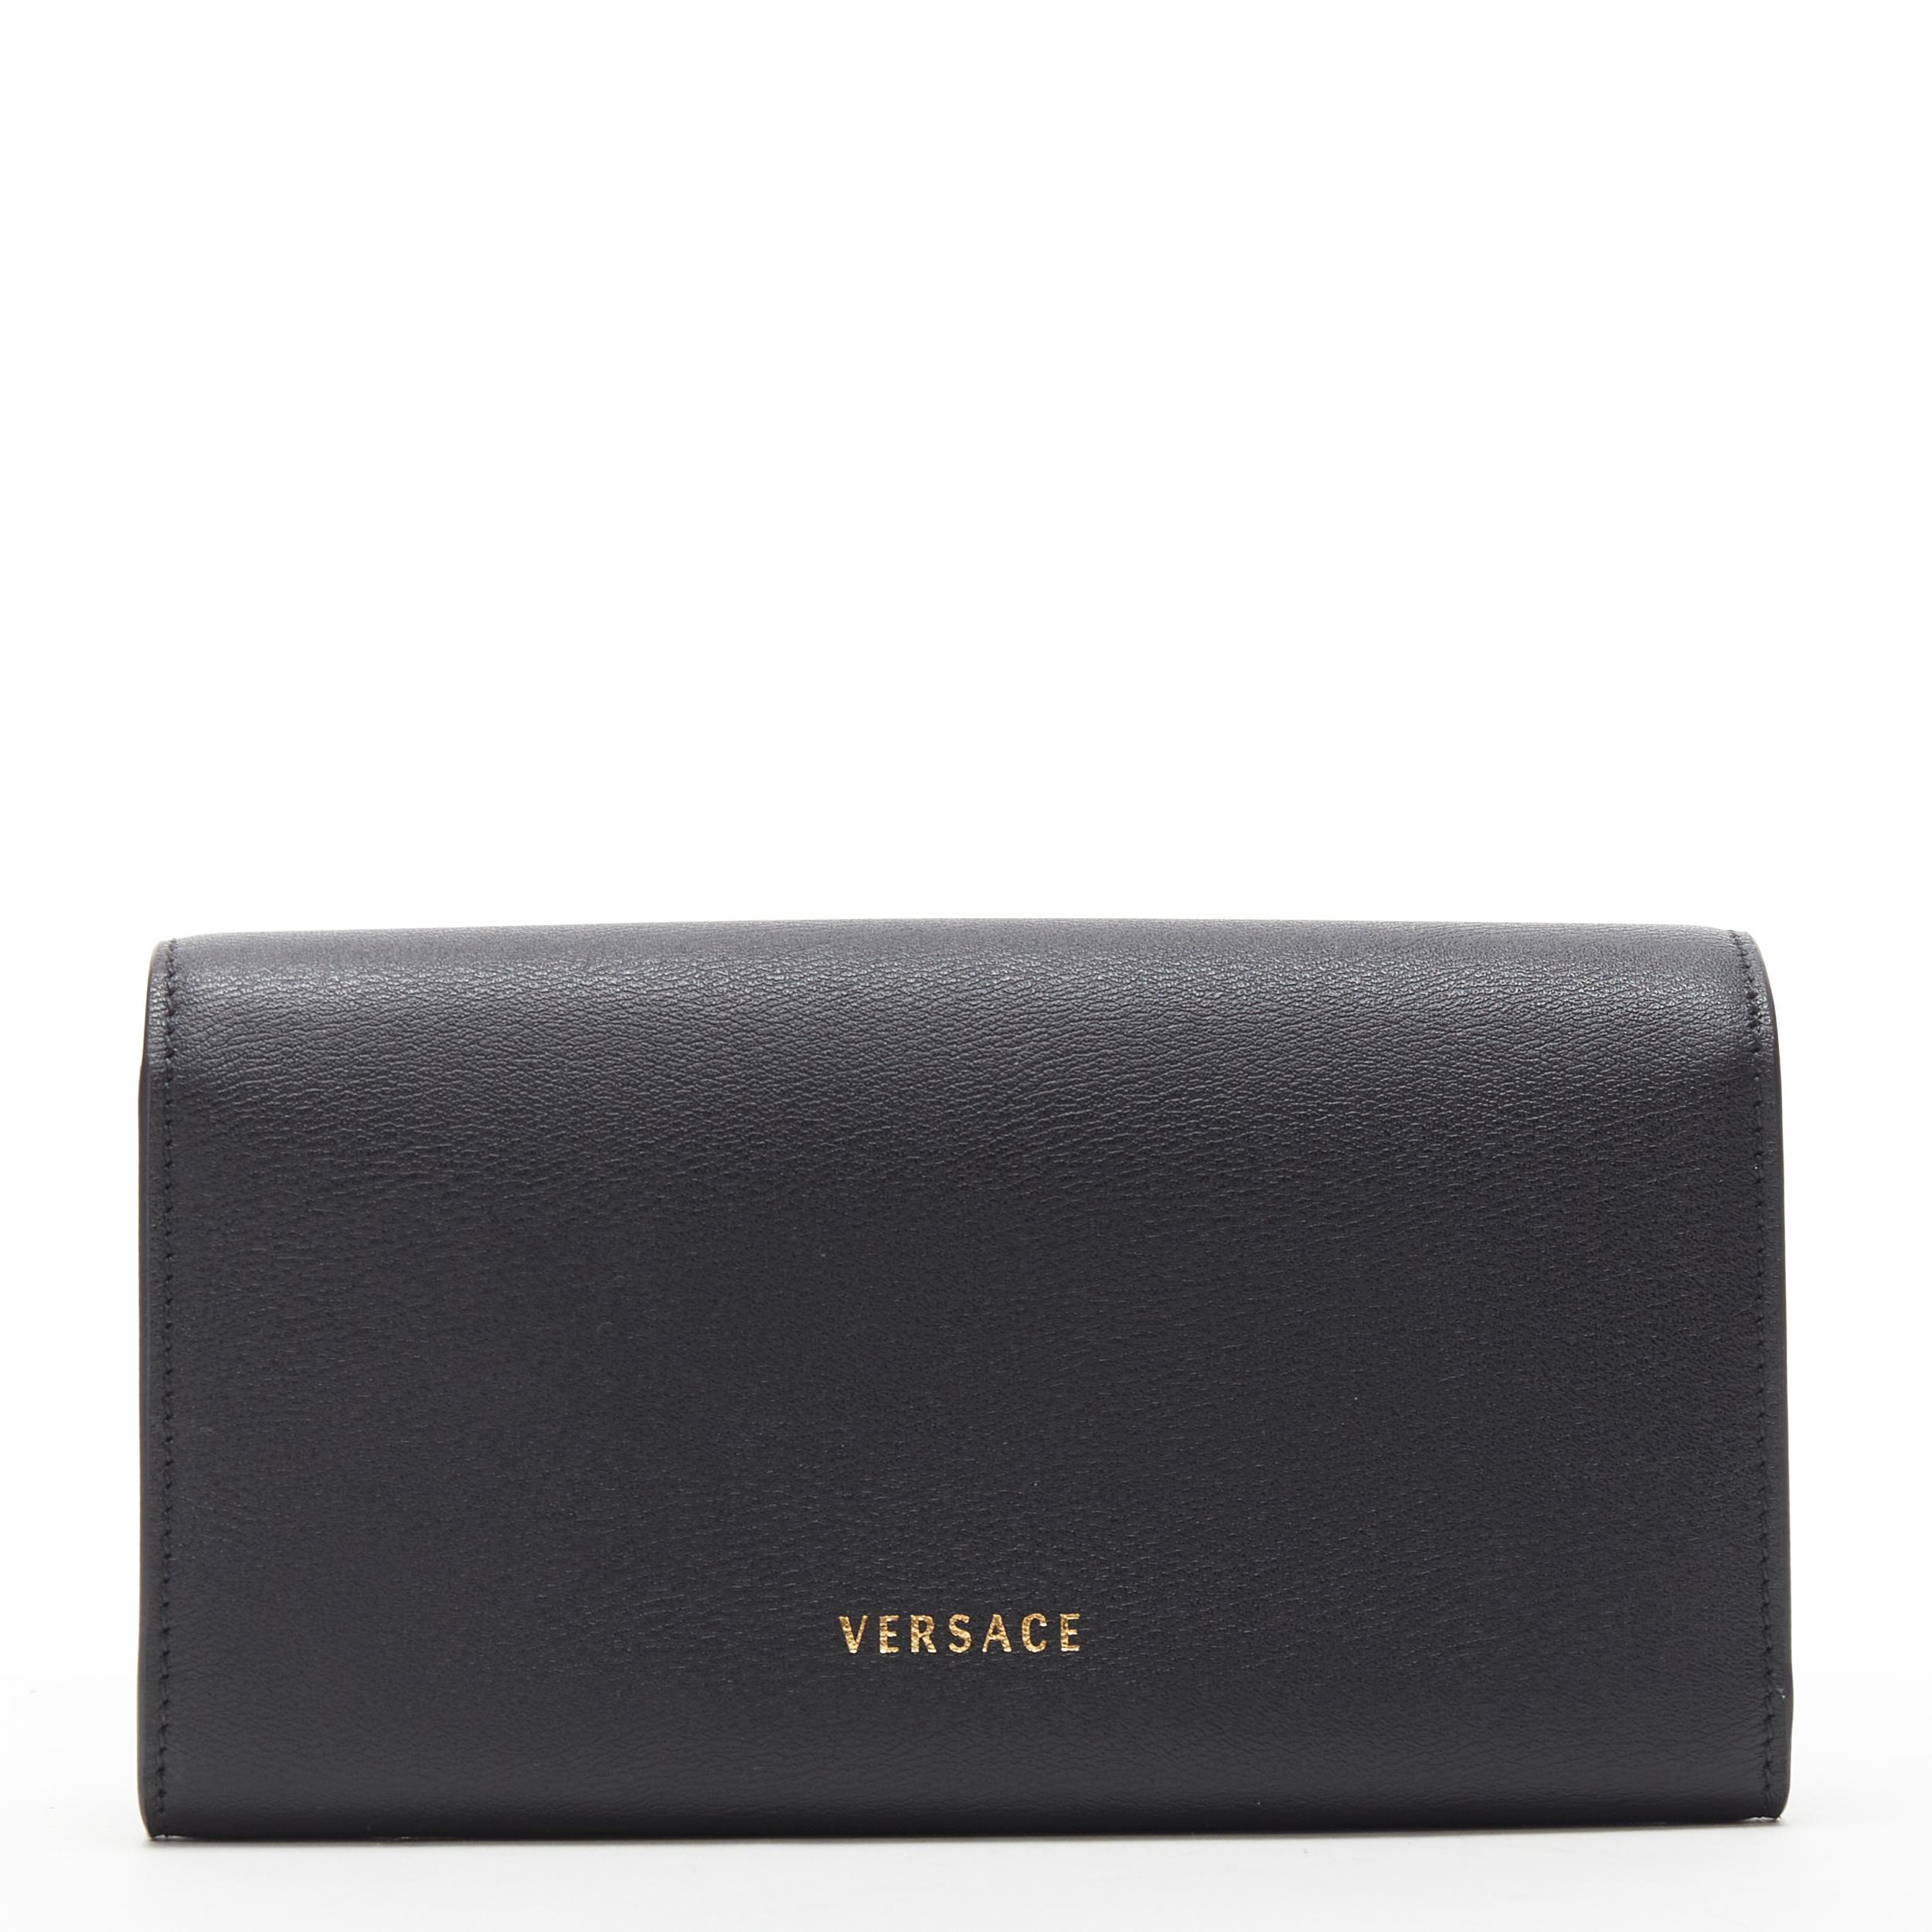 new VERSACE gold medusa coin calf leather flap long continental wallet 
Reference: TGAS/B00676 
Brand: Versace 
Designer: Donatella Versace 
Material: Leather 
Color: Black 
Pattern: Solid 
Closure: Button 
Made in: Italy 

CONDITION: 
Condition: